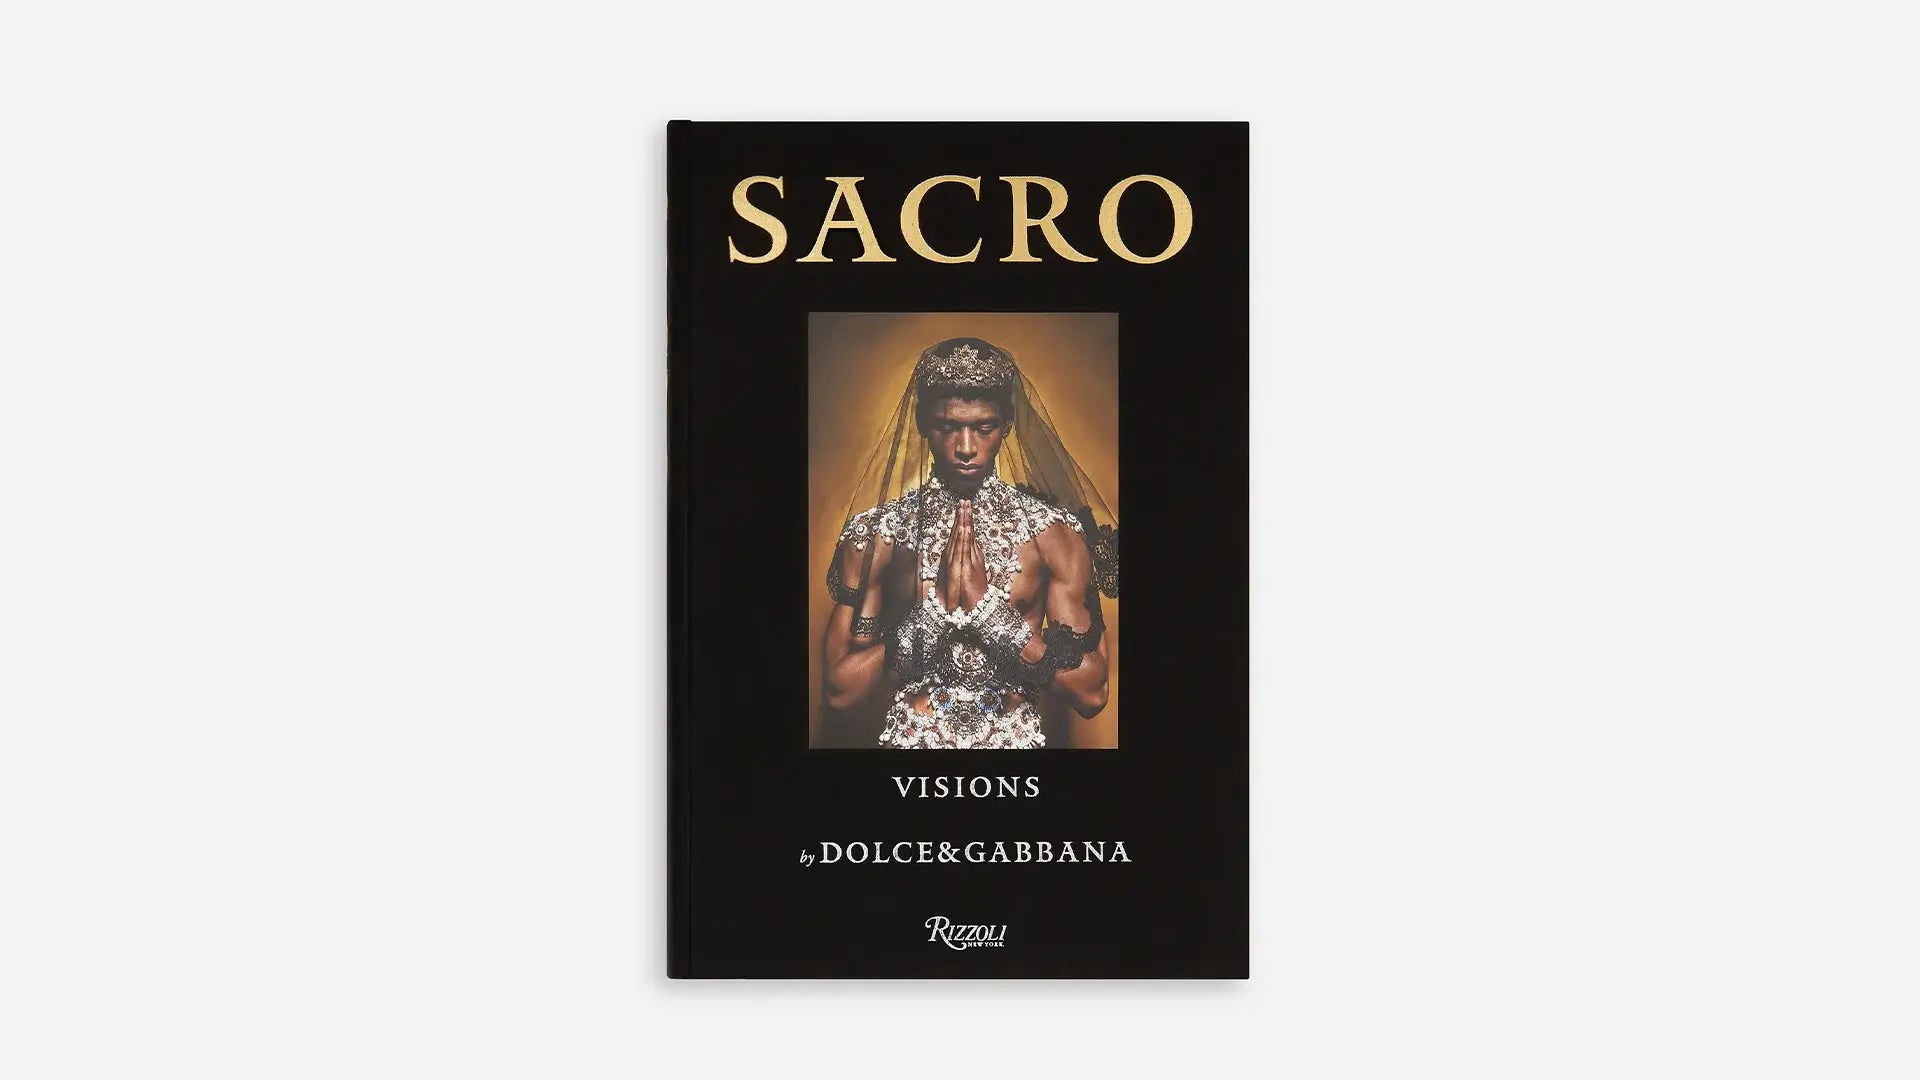 Sacro: Visions by Dolce&Gabbana, a Comprehensive Publication